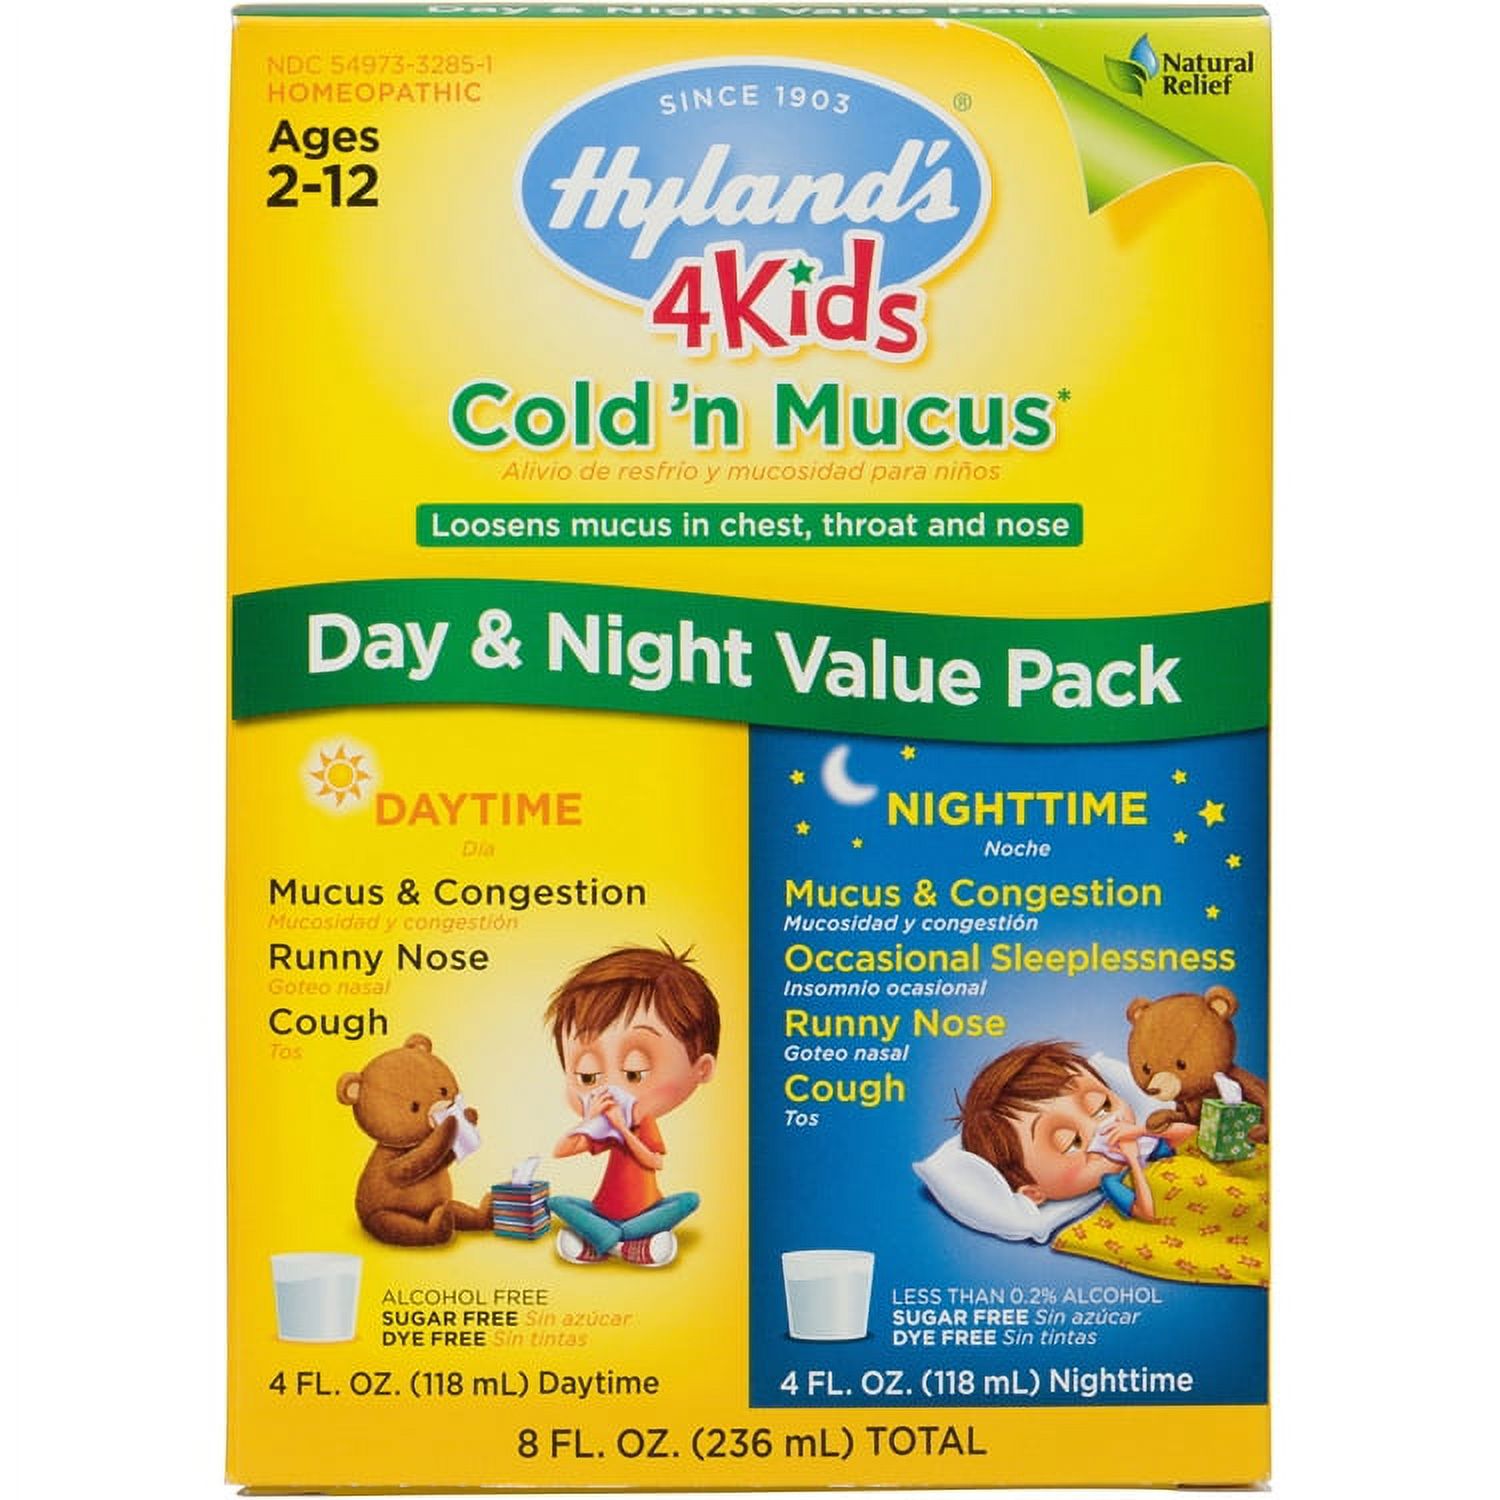 Hyland's Naturals 4 Kids Cold 'n Mucus Day & Night Value Pack, Natural Relief of Cold & Mucus, 8 Ounces - image 1 of 2